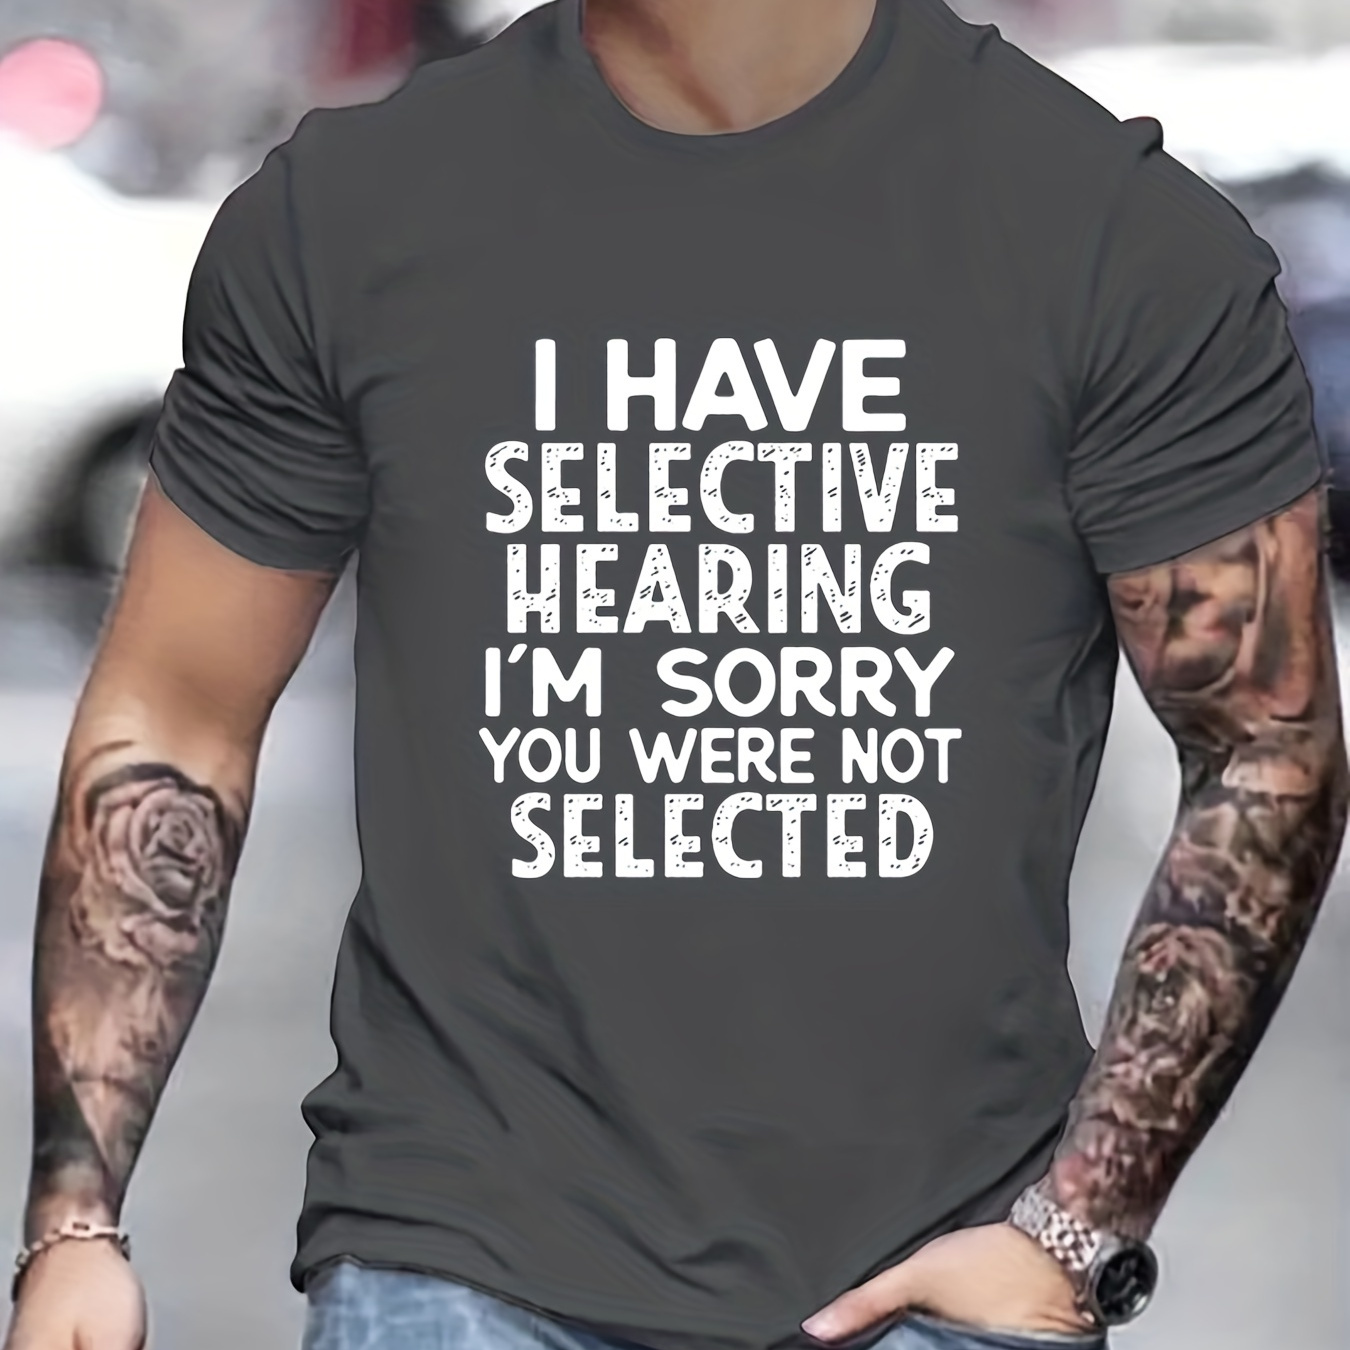 

I Have Selective Hearing Letter Graphic Print Men's Creative Top, Casual Short Sleeve Crew Neck T-shirt, Men's Tee For Summer Outdoor